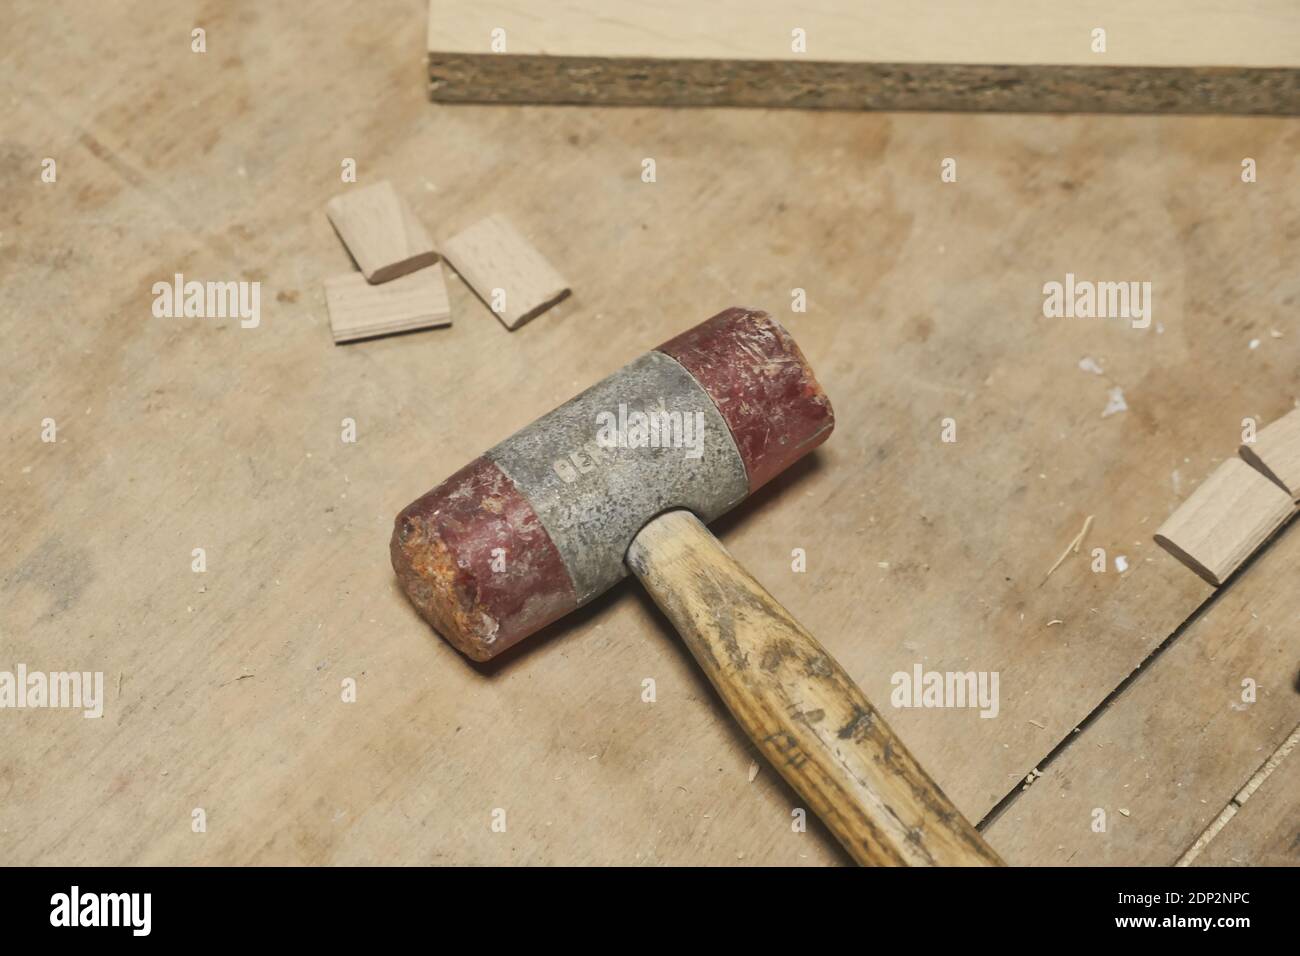 Hammer on wooden workshop table. High angle view. Stock Photo